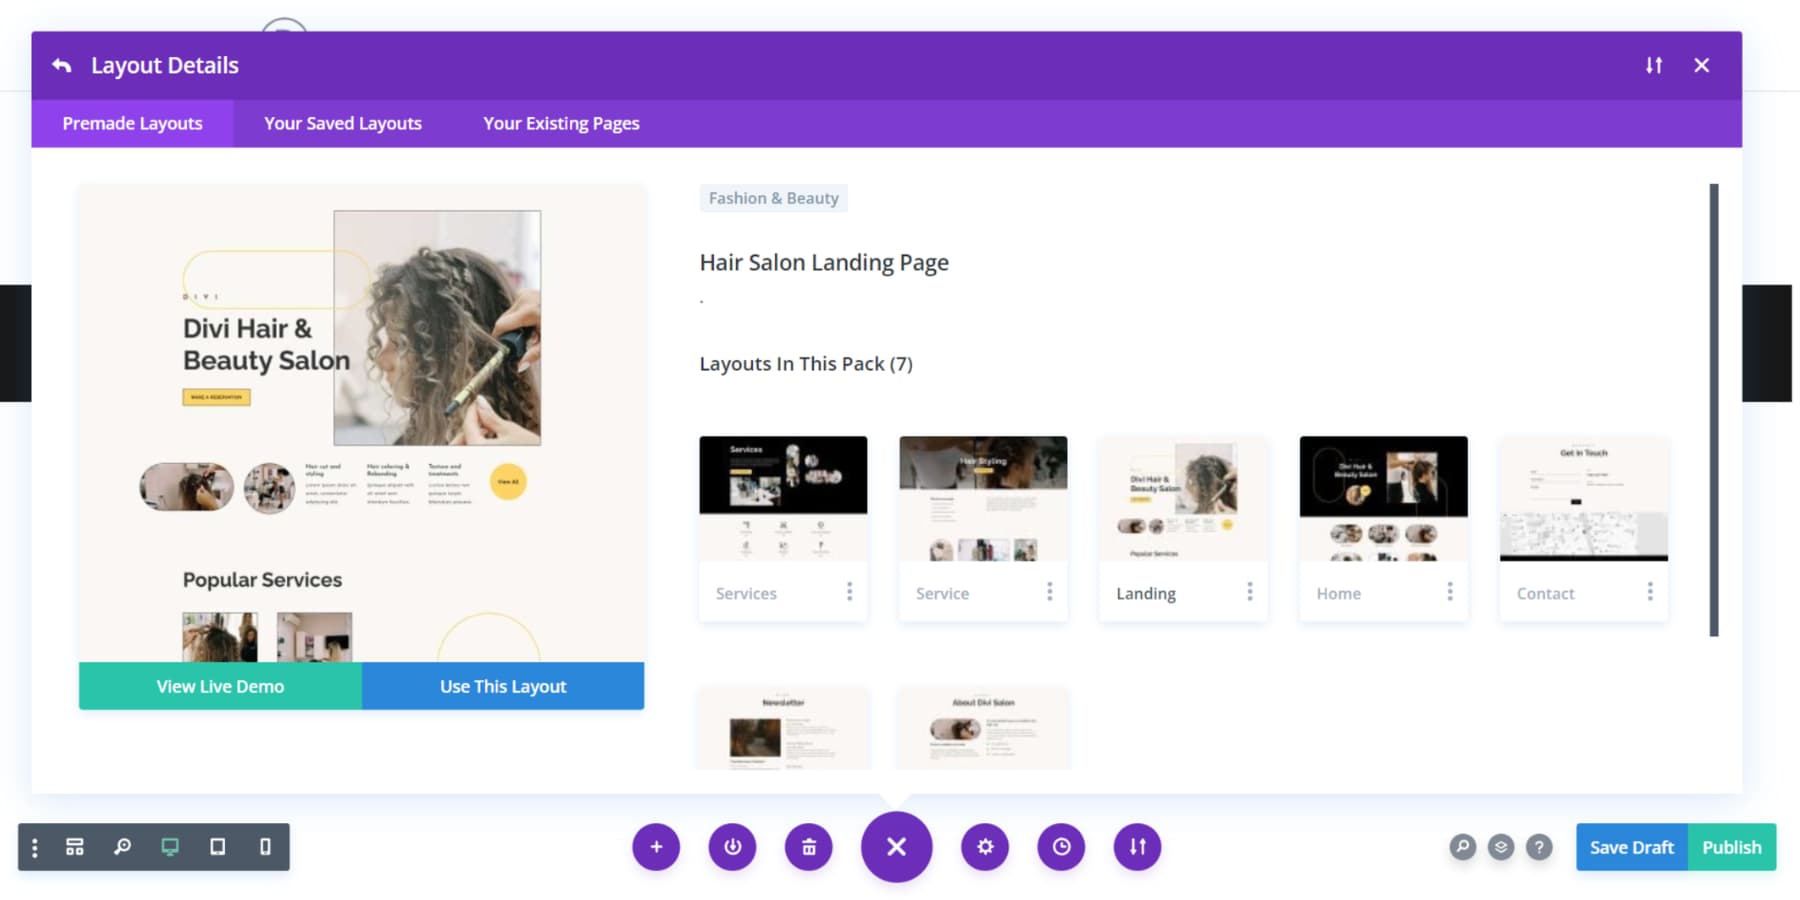 A screenshot of how to find and use pre-made layouts inside the Divi editor